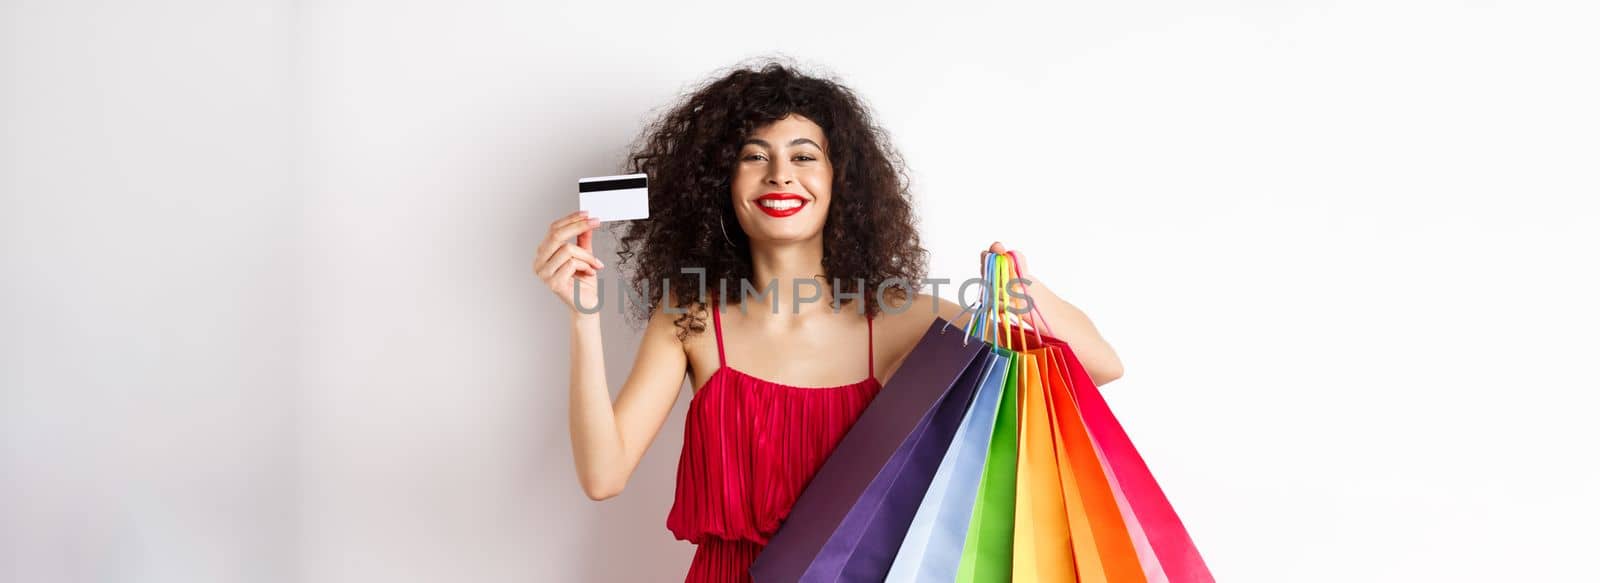 Happy elegant woman in red dress, showing shopping bags and plastic credit card, smiling pleased, standing on white background.